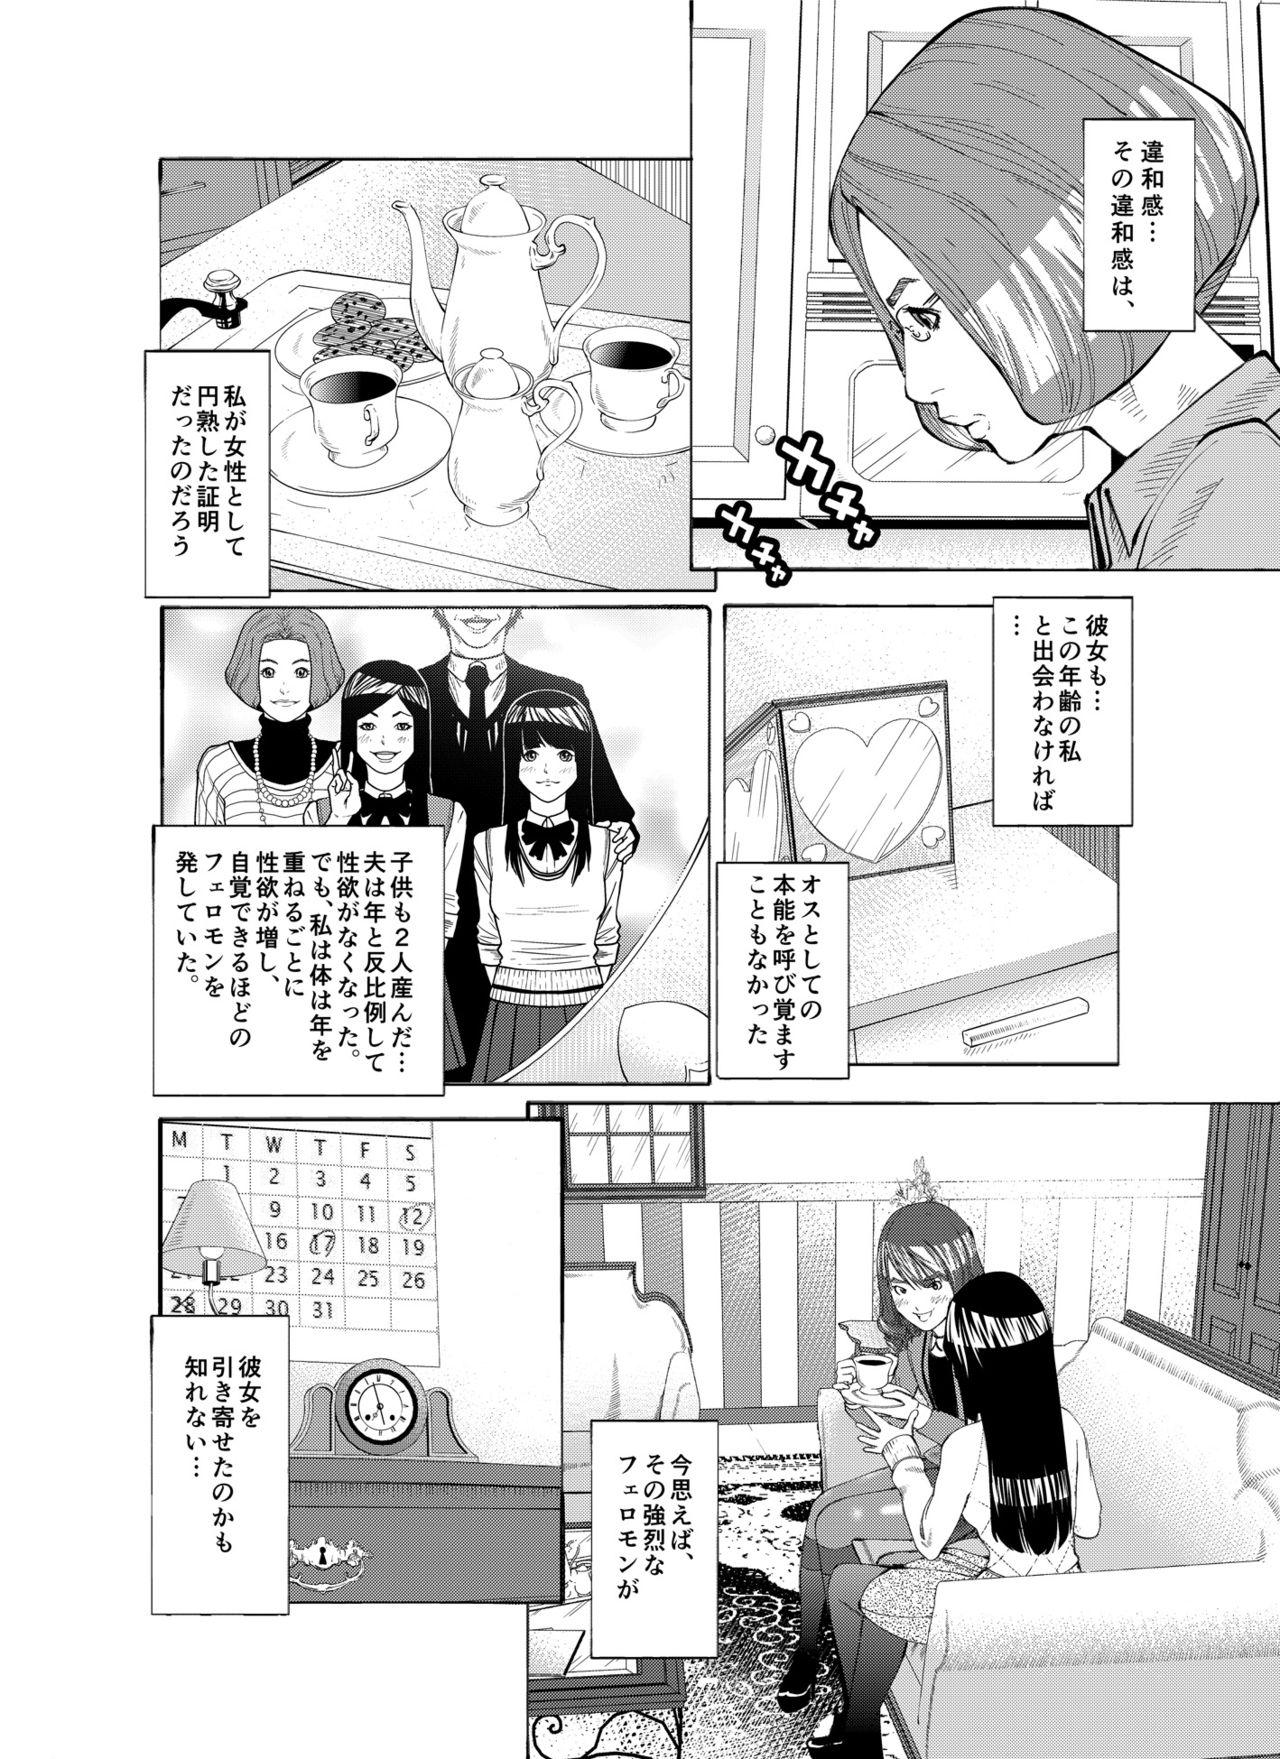 Eat m.works vol 1 Roundass - Page 4